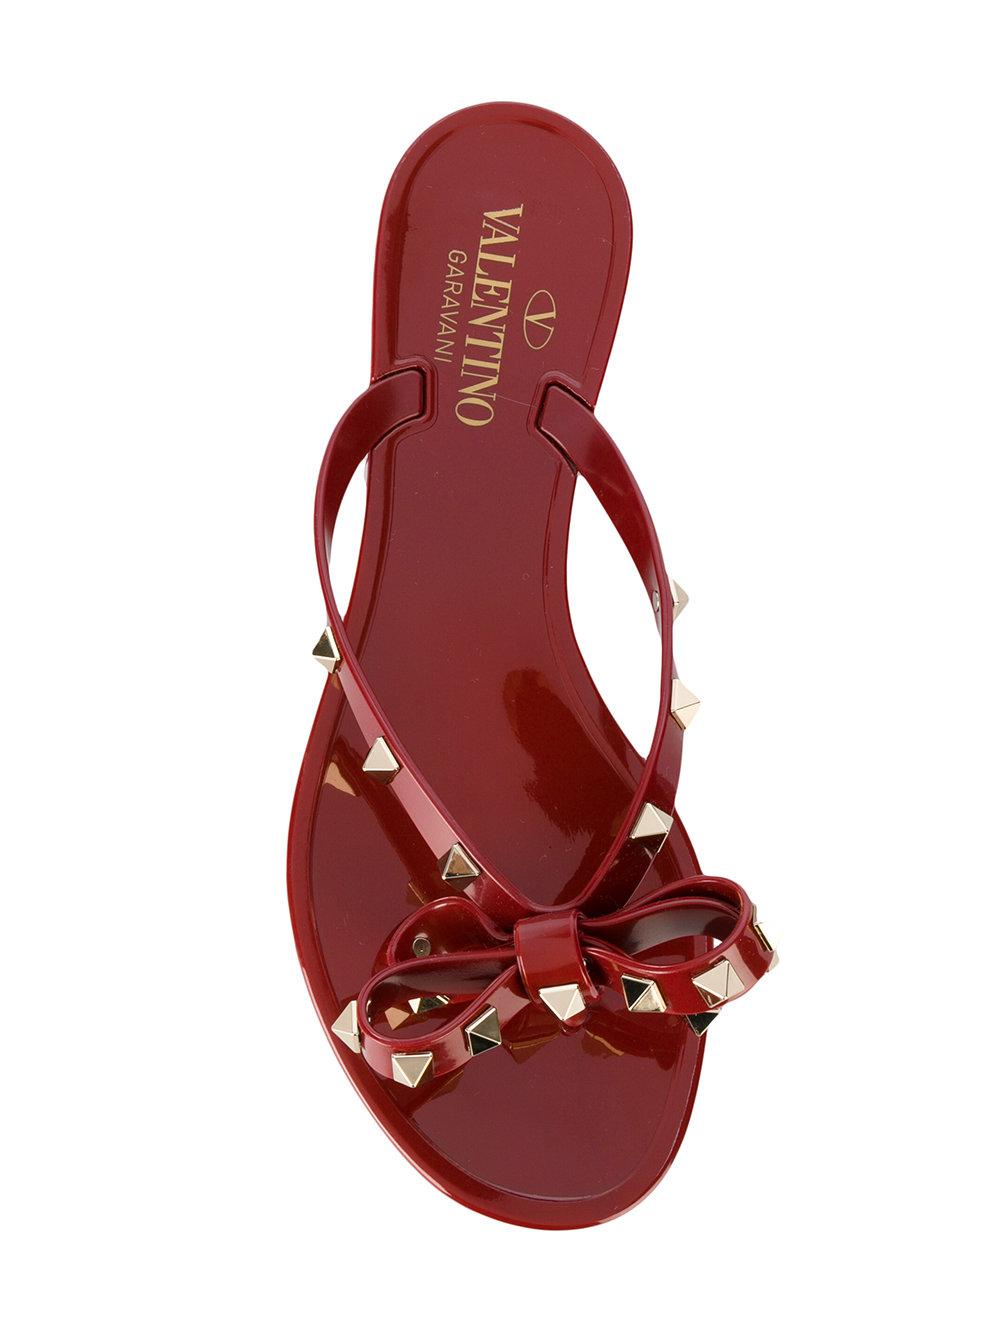 Valentino Jelly Rockstud Flat Thong Sandals in Red - Lyst